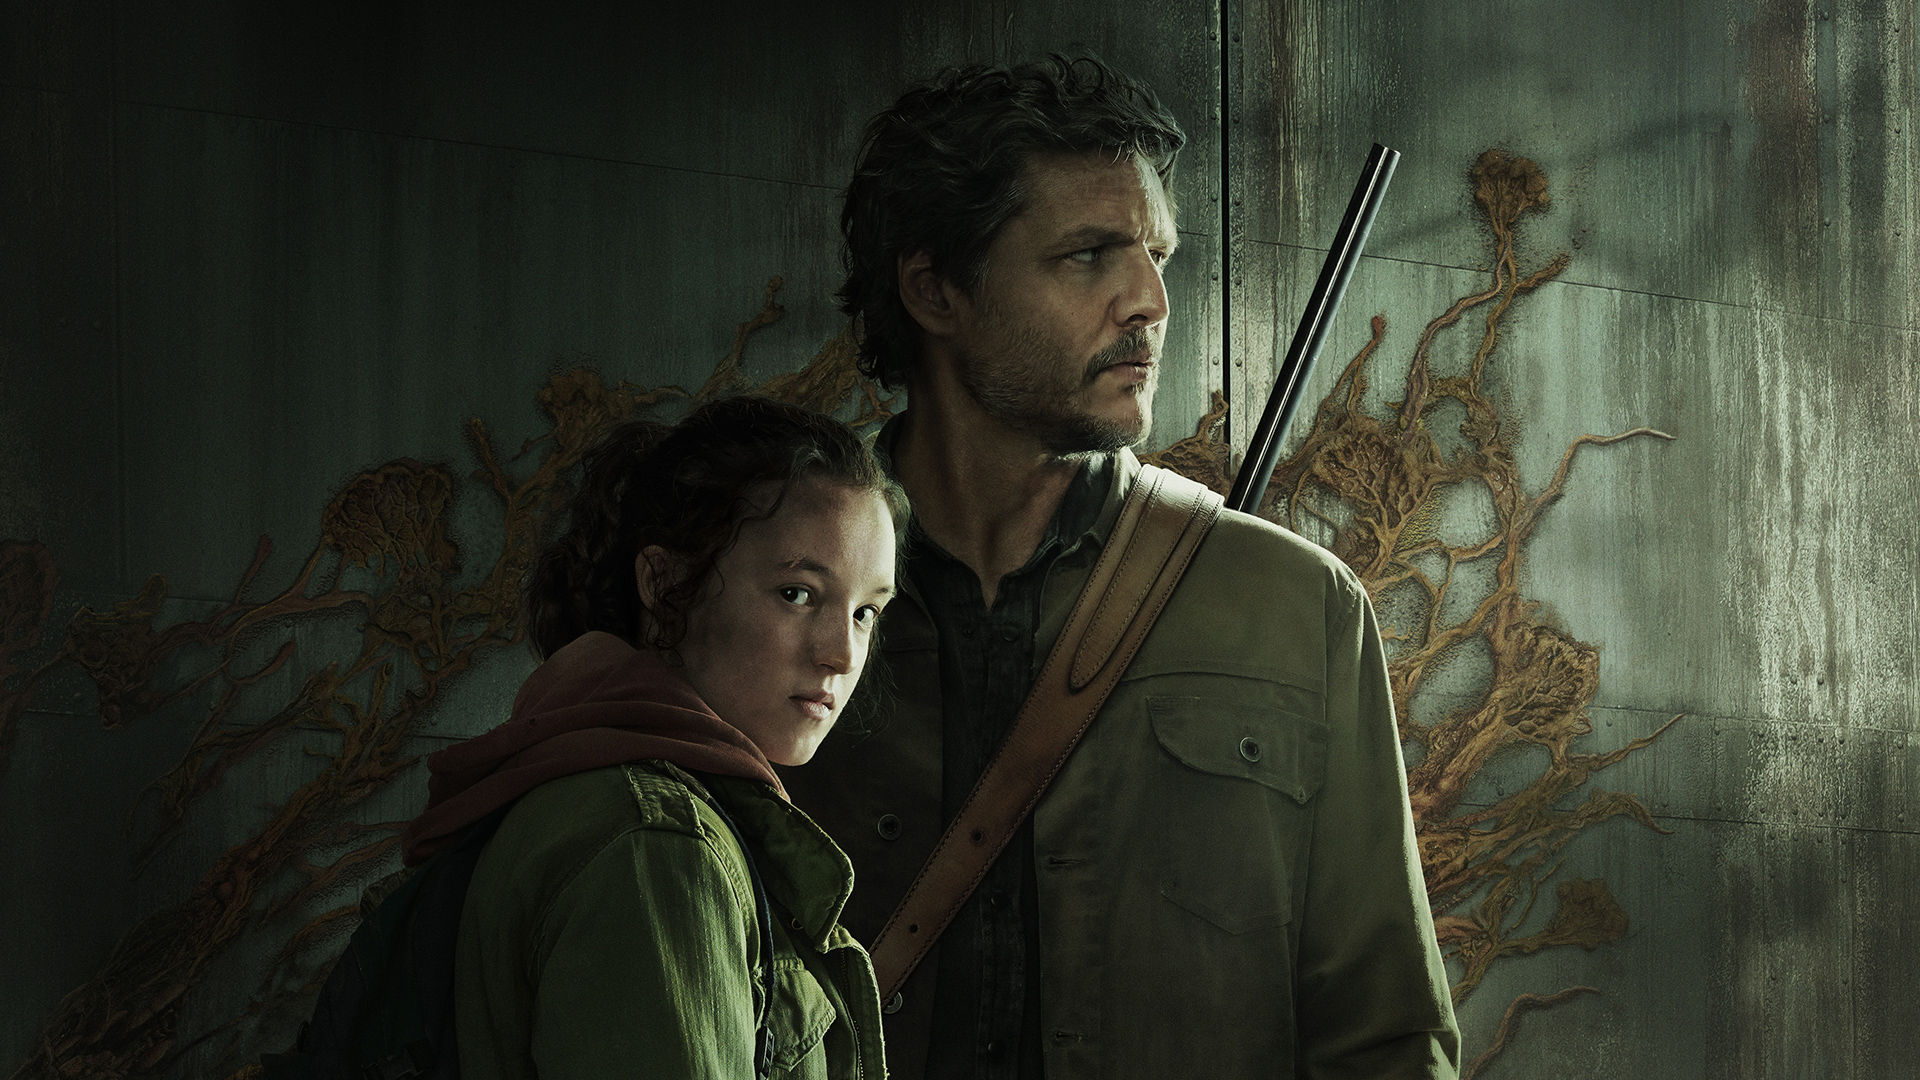 Bella Ramsey's Ellie and Pedro Pascal's Joel in The Last of Us promotional image